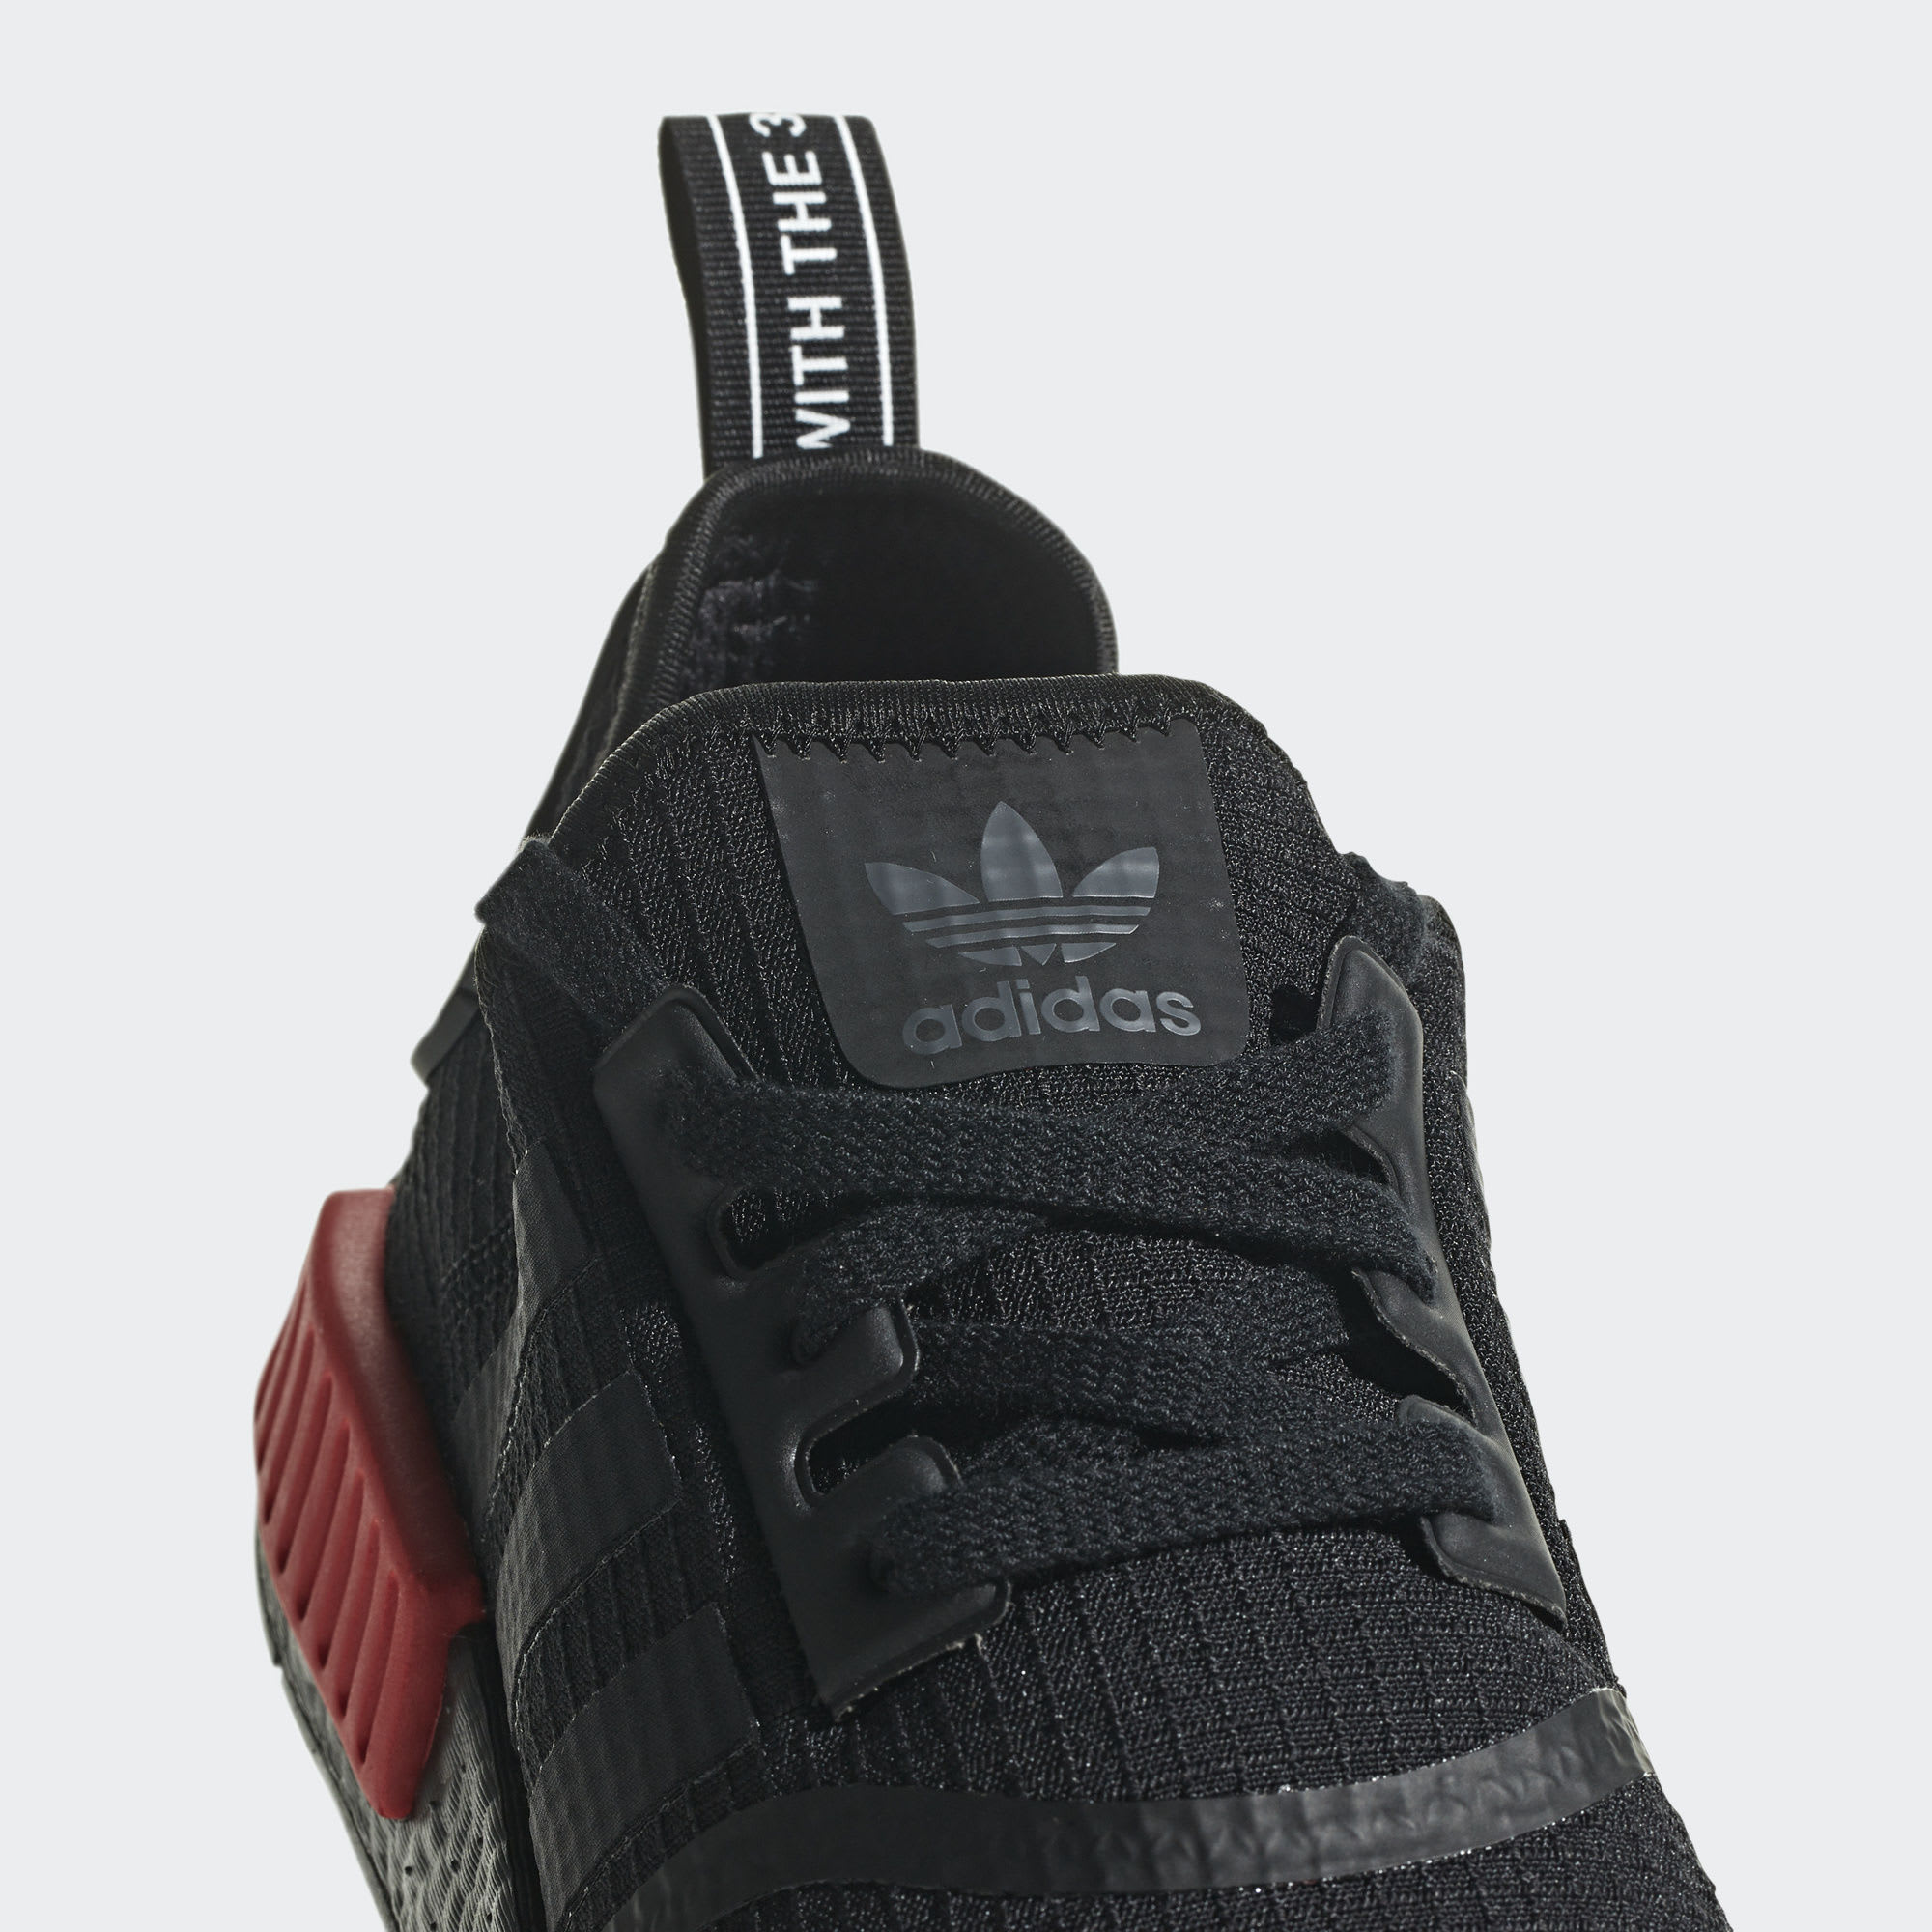 adidas-nmd-r1-bred-release-date-b37618-tongue